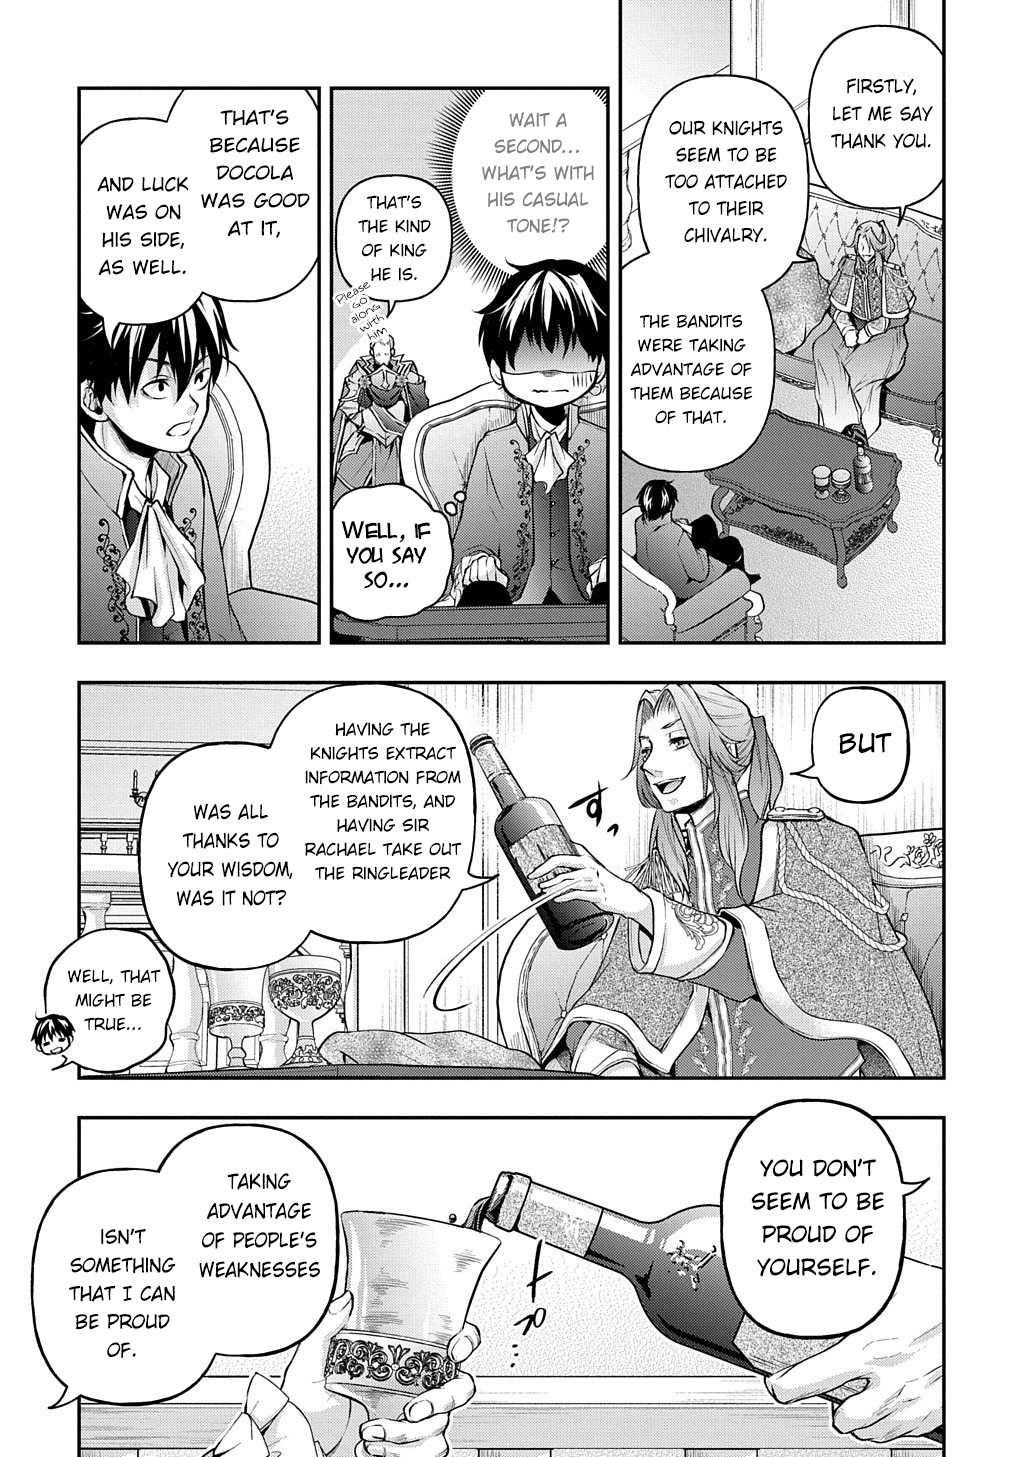 It's Sudden, But I Came To Another World! But I Hope To Live Safely - Page 3